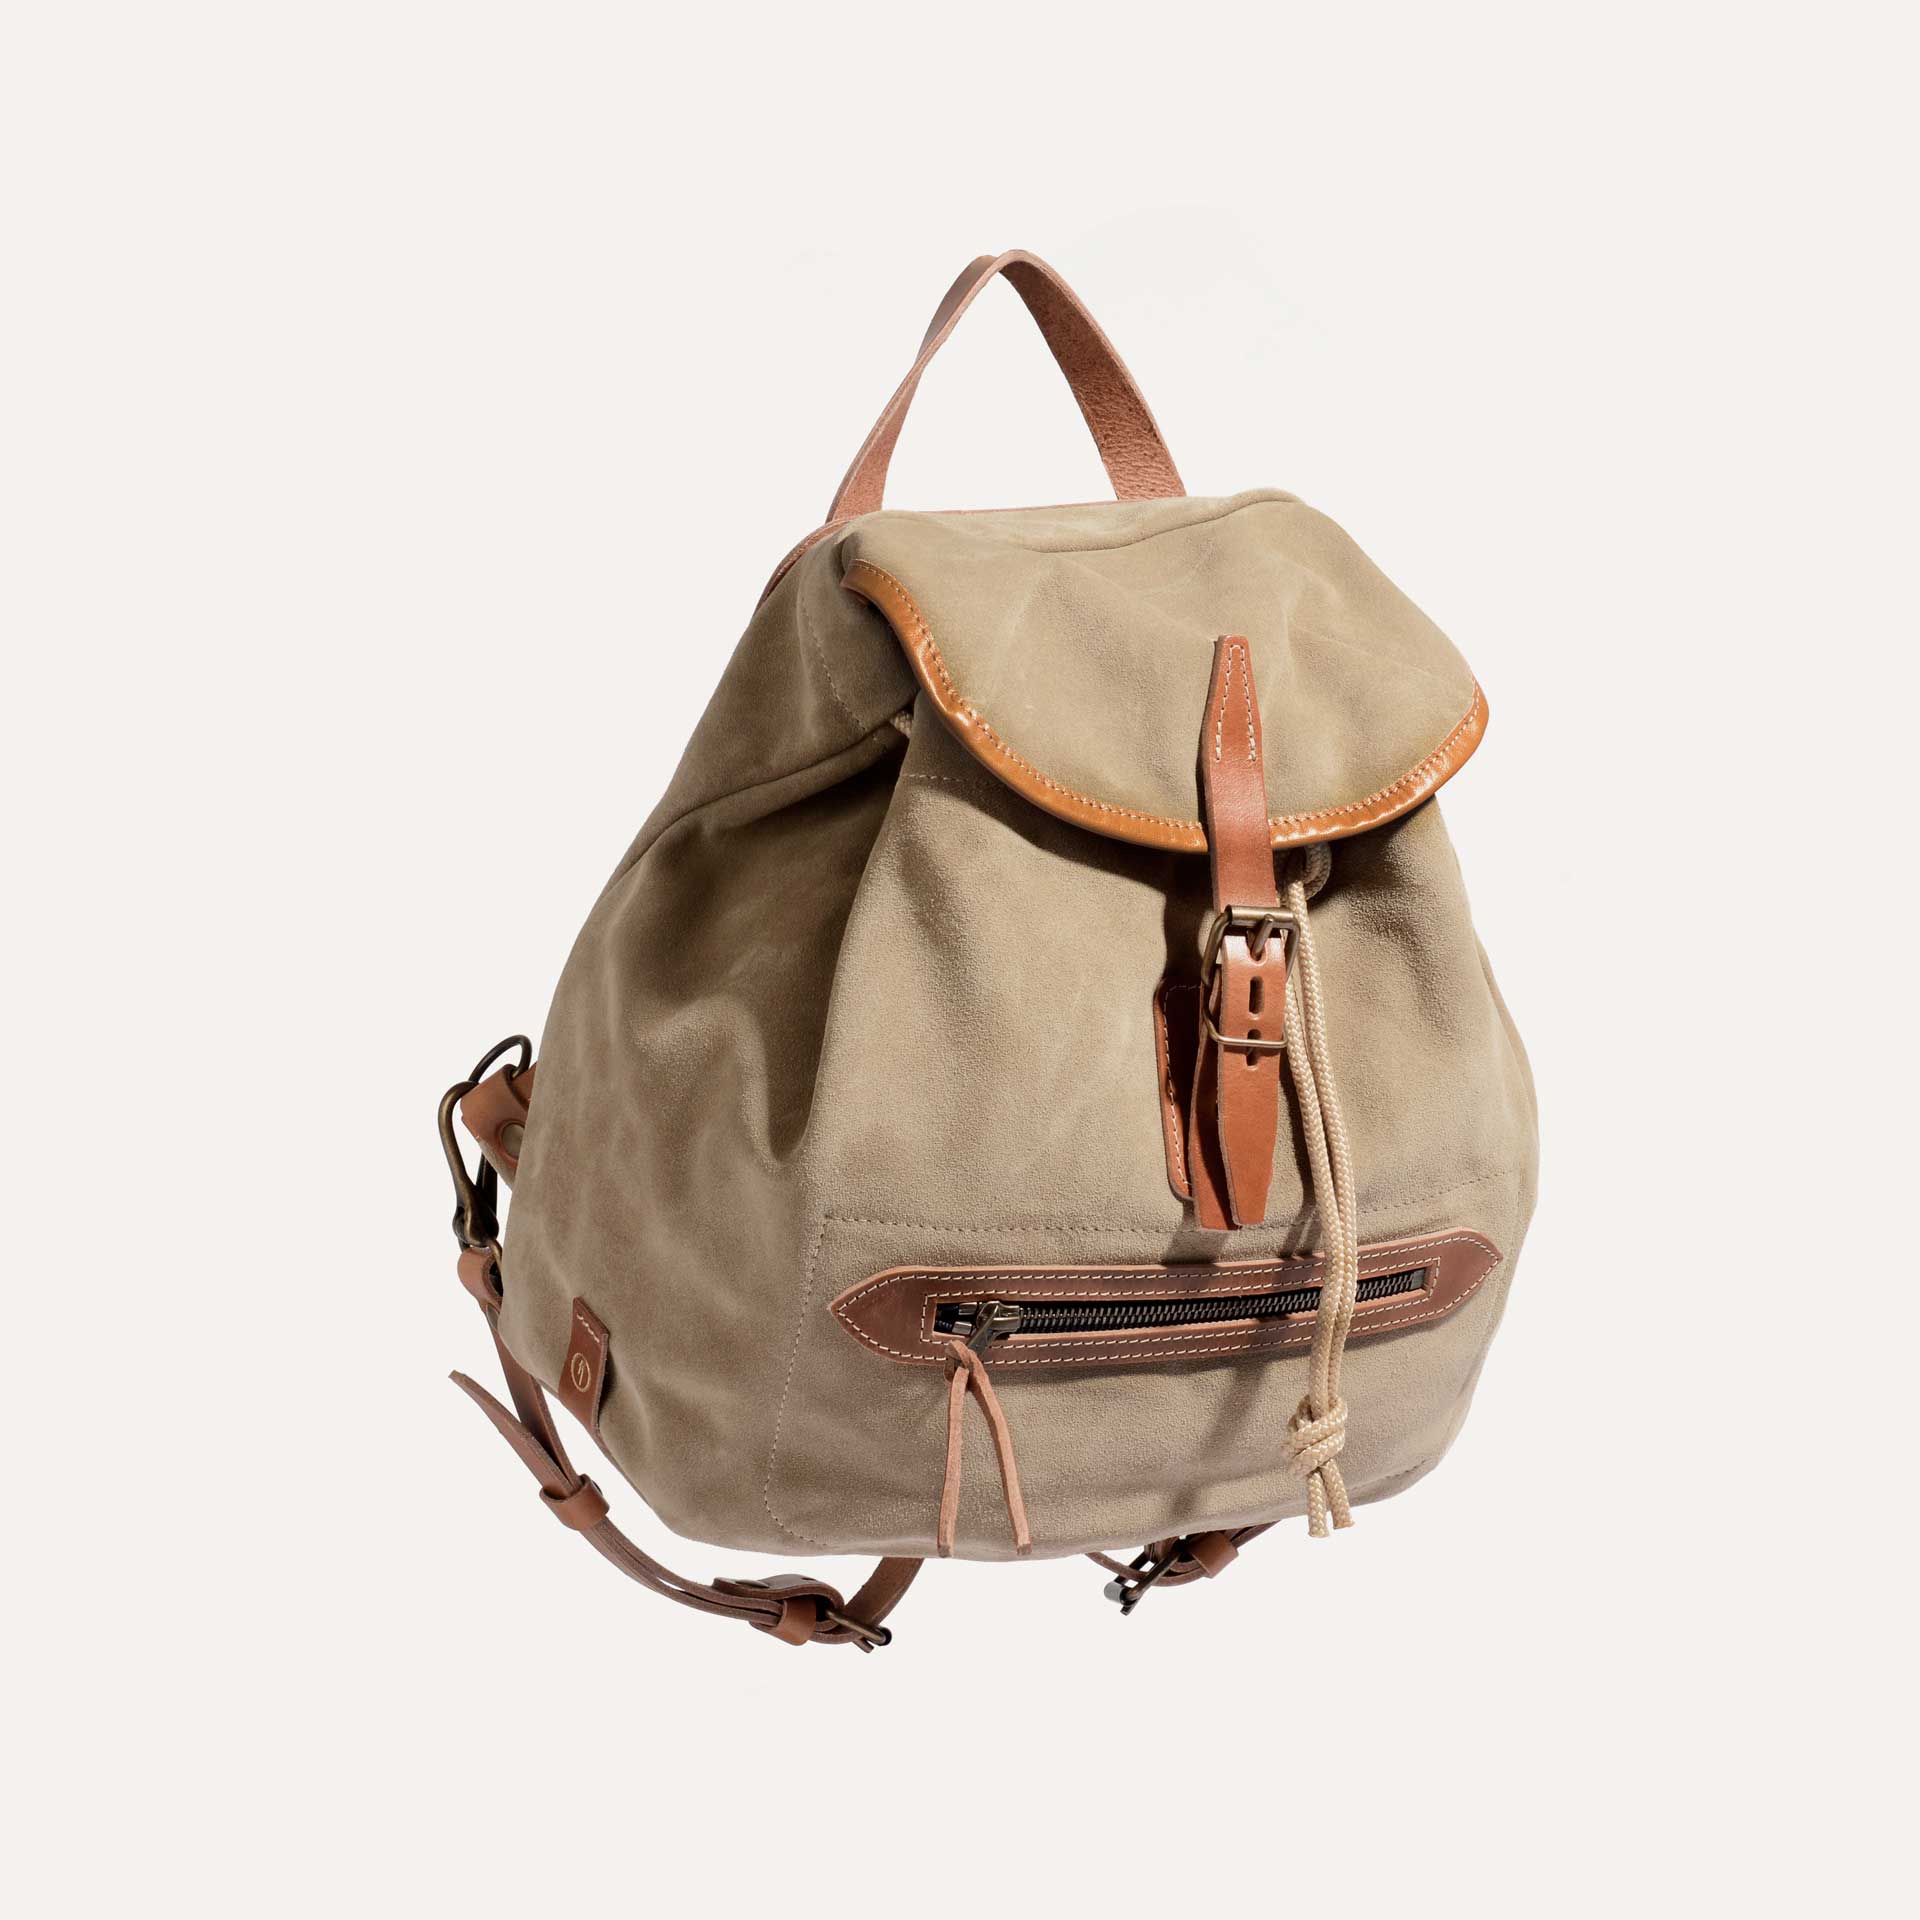 Camp suede leather backpack